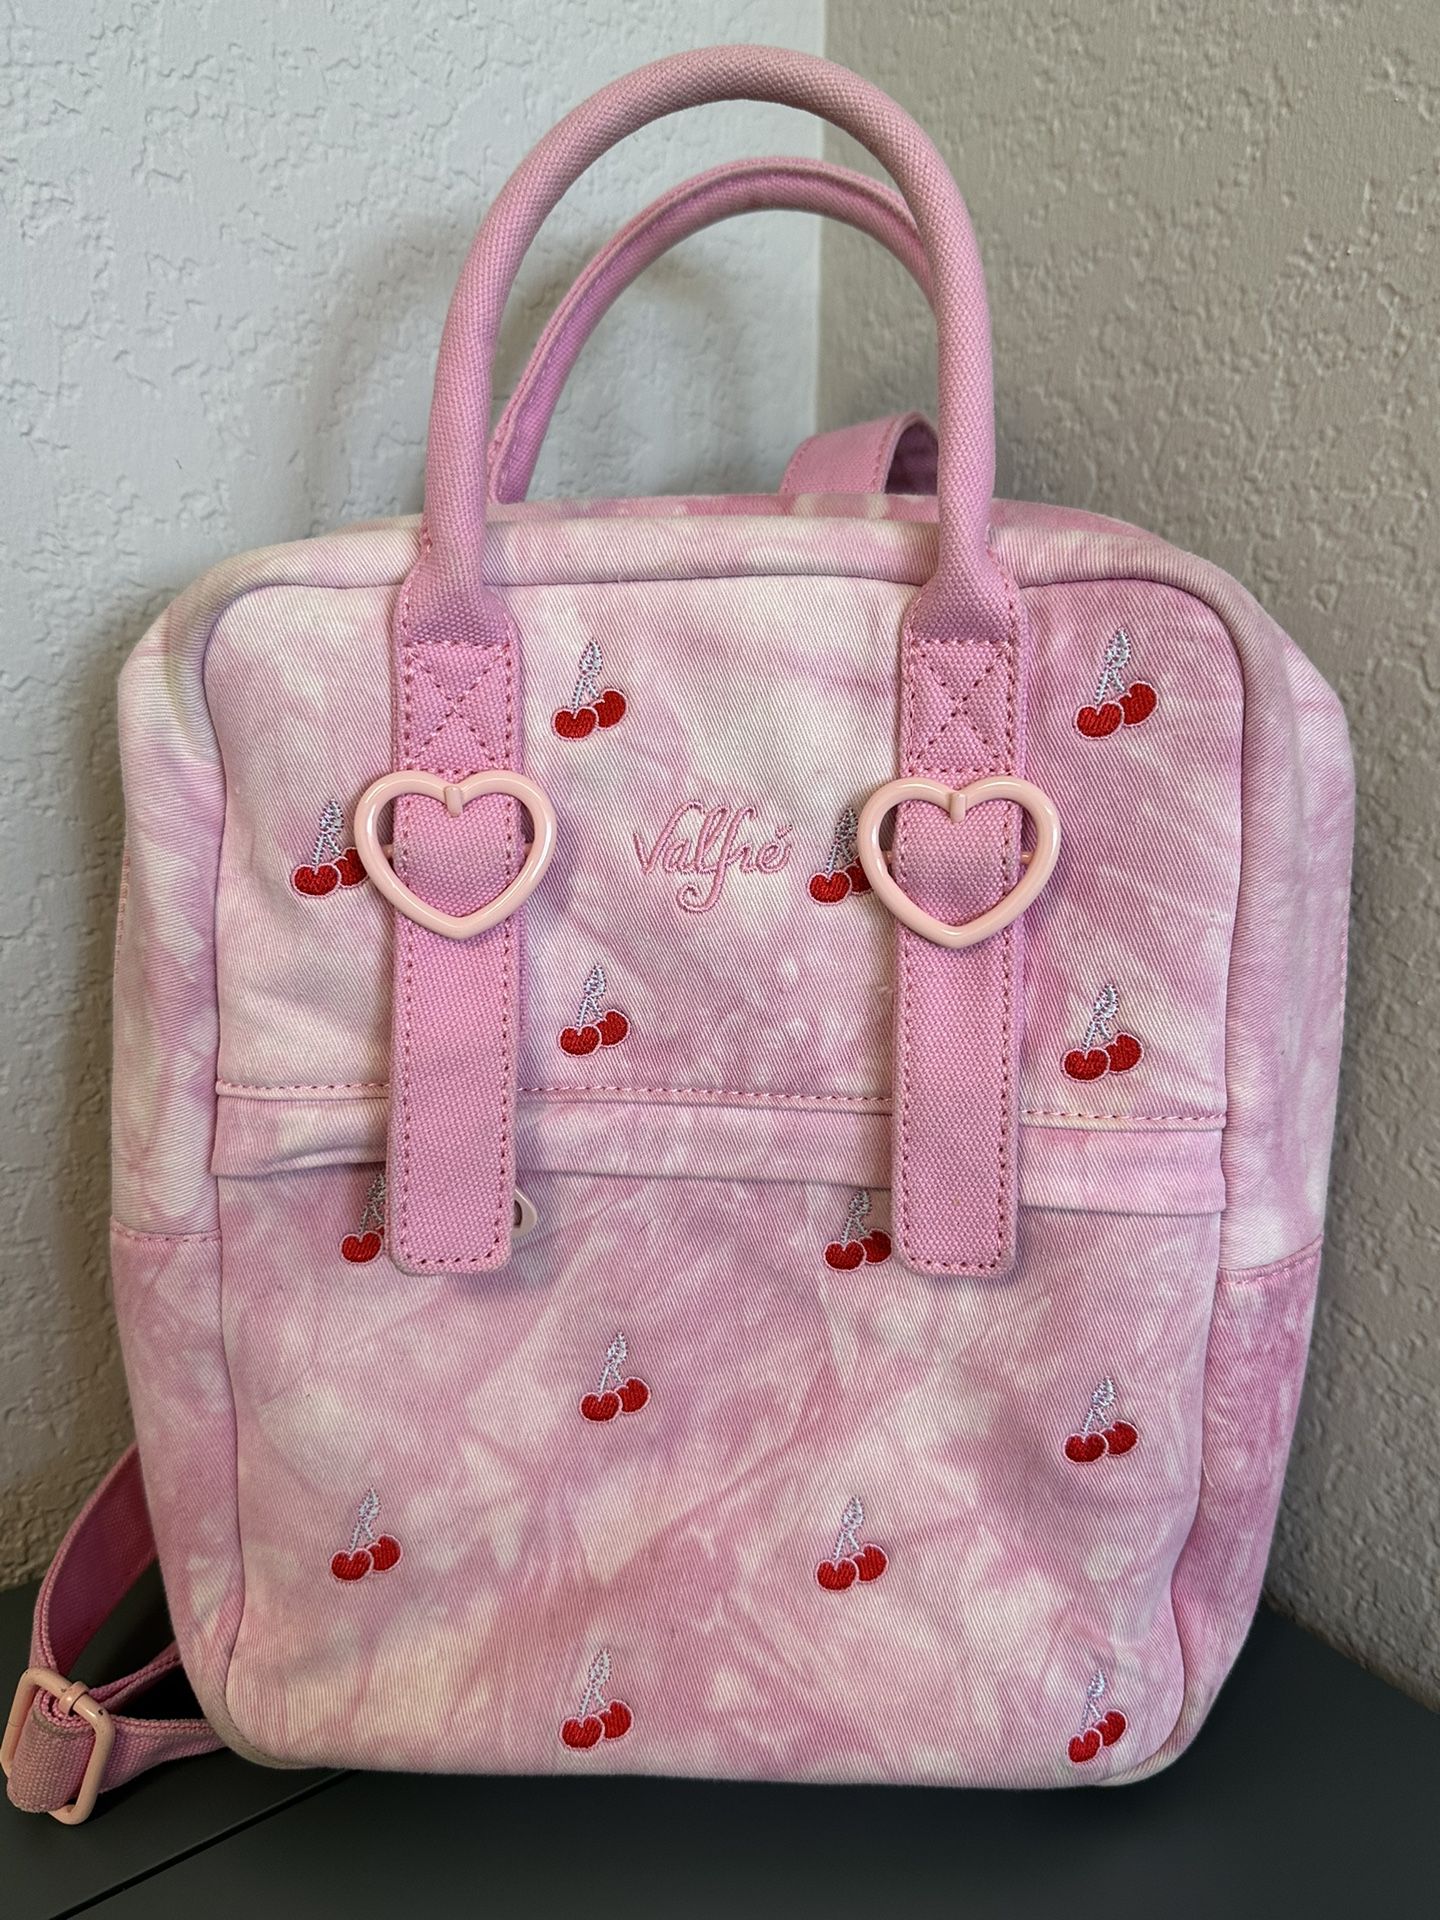 Valfre Pink Backpack